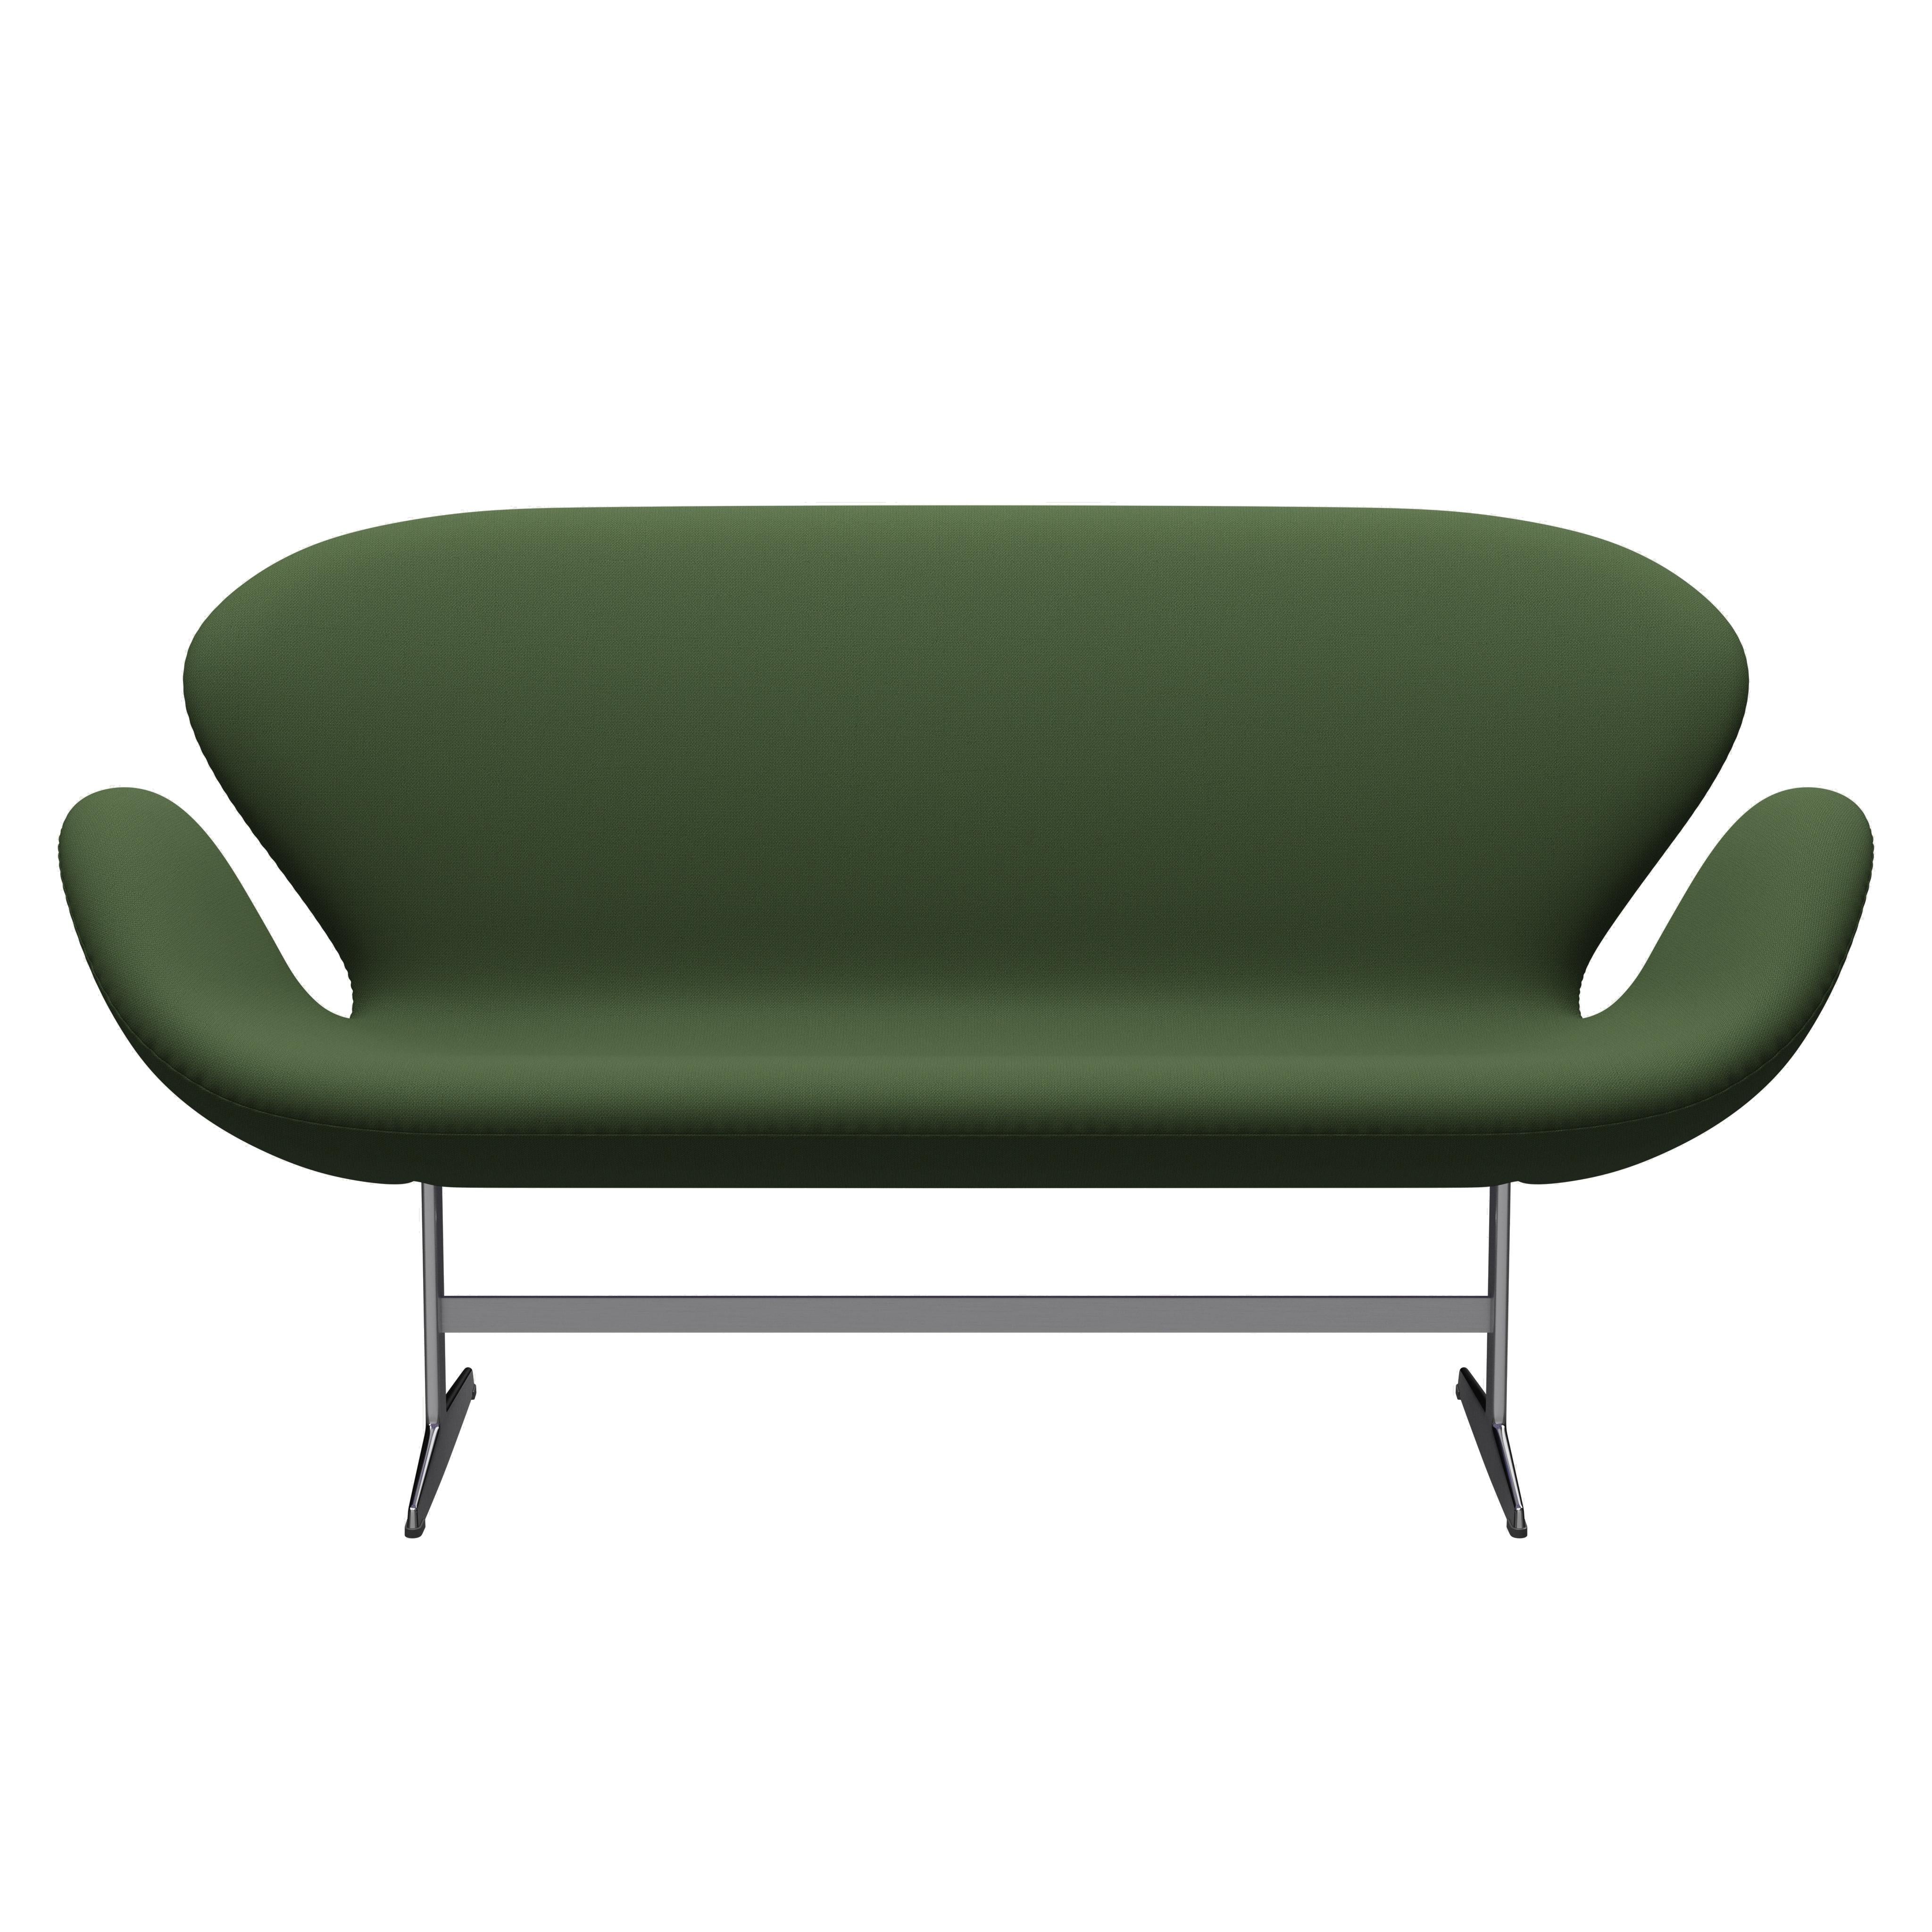 Arne Jacobsen 'Swan' Sofa for Fritz Hansen in Fabric Upholstery (Cat. 1) In New Condition For Sale In Glendale, CA